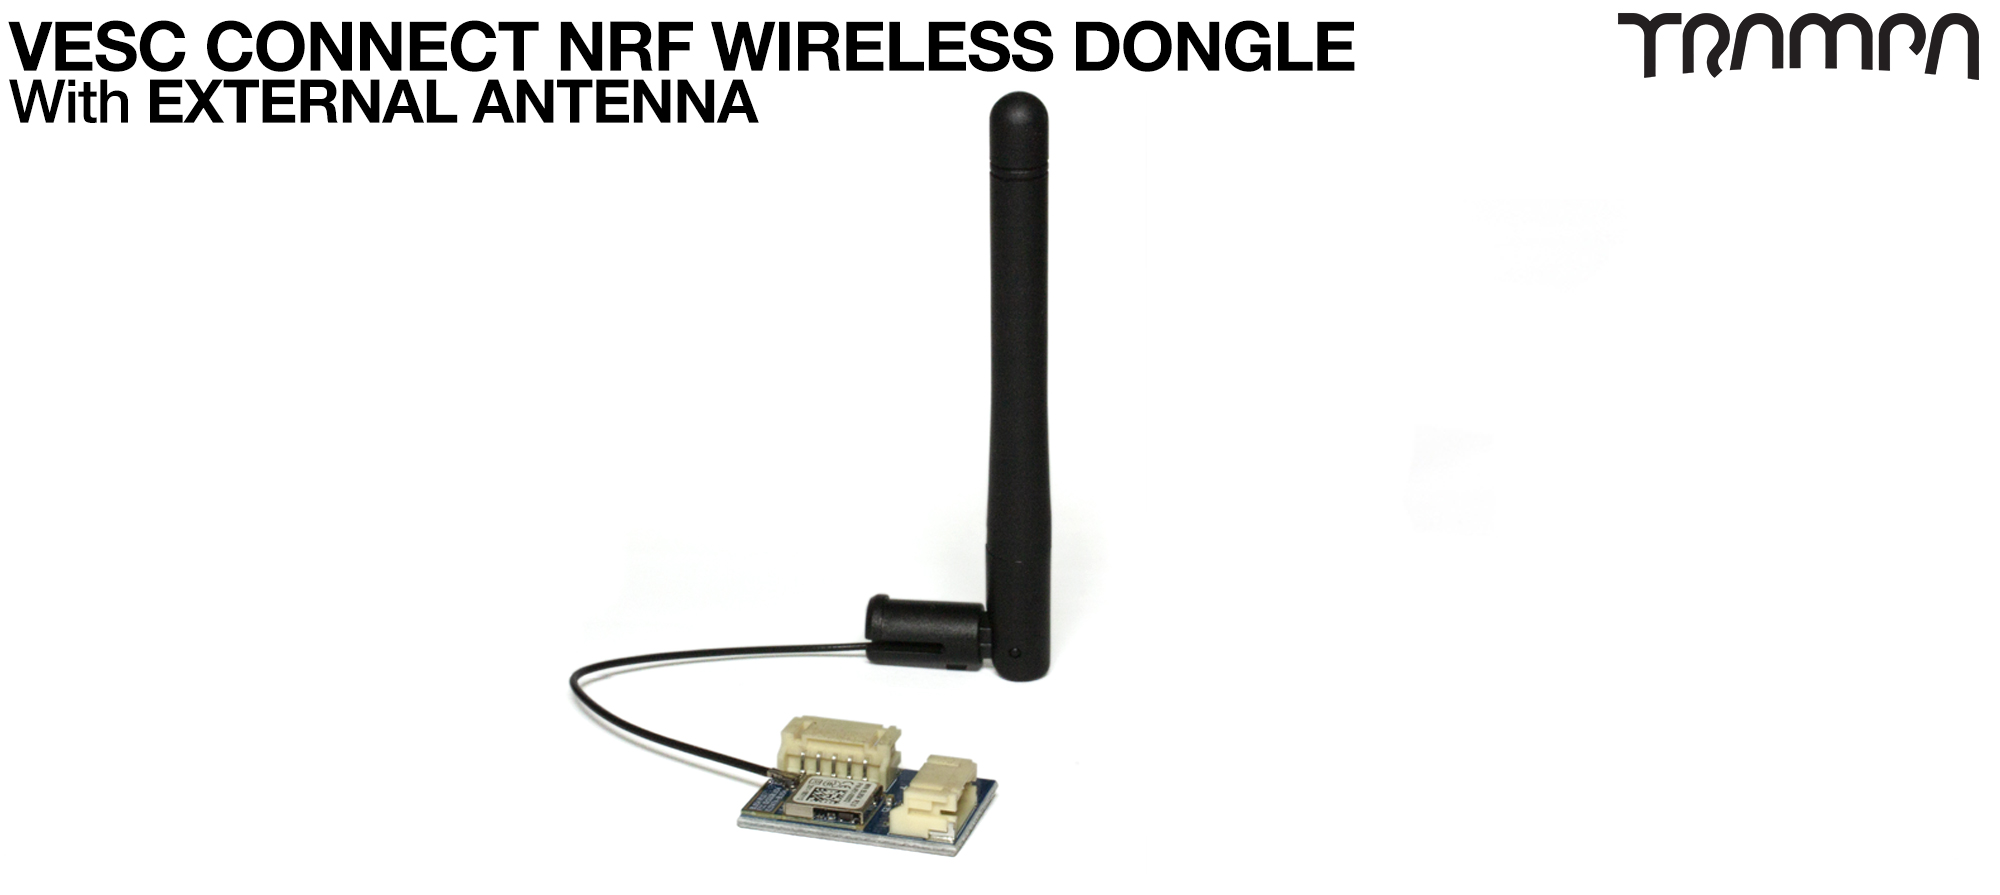 2x NRF Dongle with EXTERNAL DIPOLE Antenna (+£62.50)